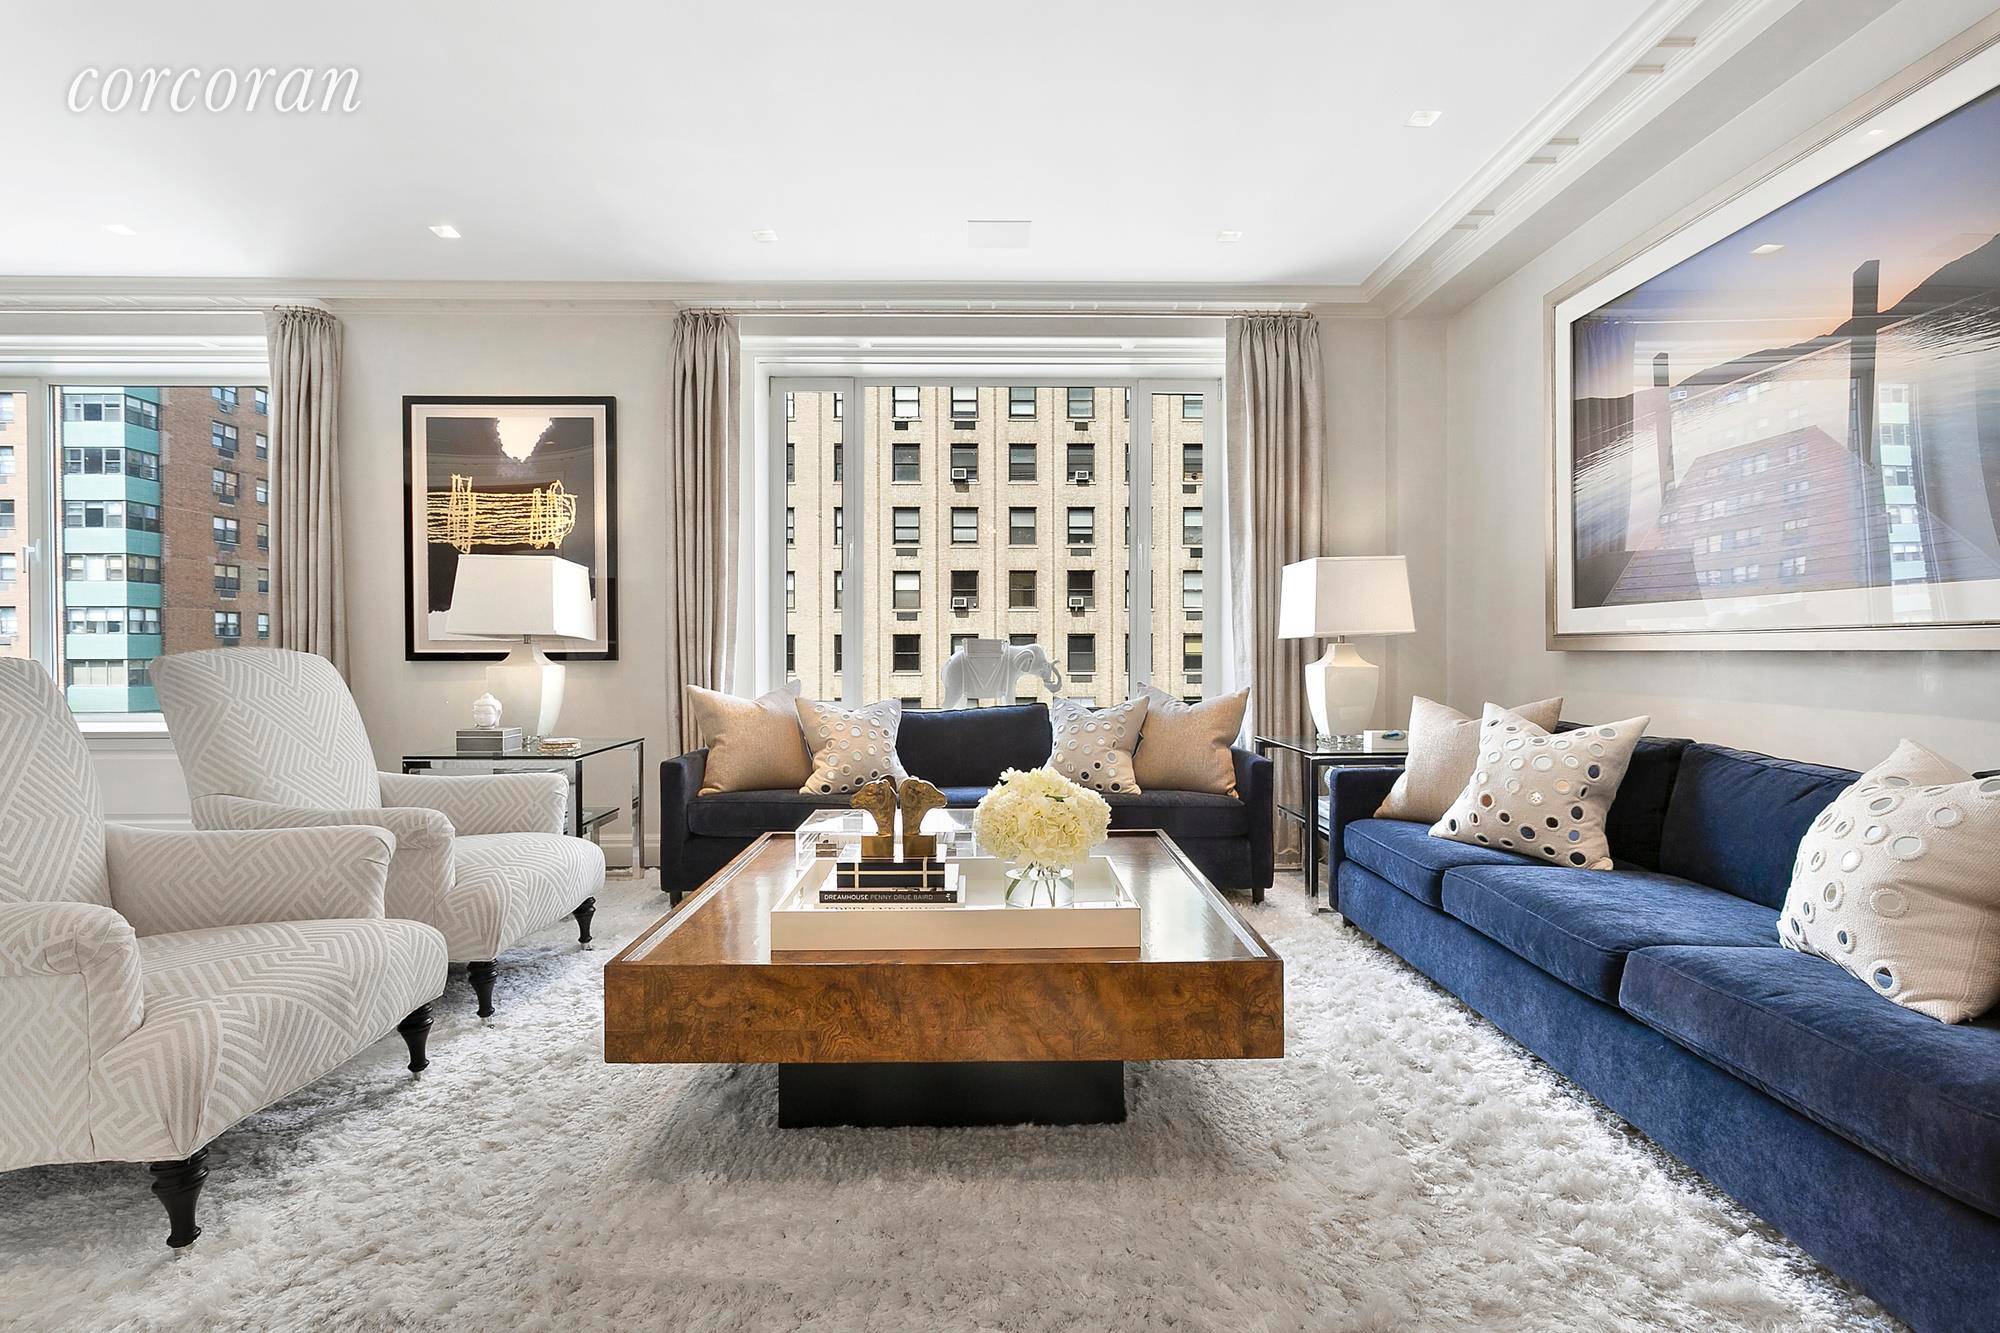 Situated in the absolute heart of the Upper East Side, two blocks from Central Park, and nearby the most fashionable restaurants, shopping, transportation and some of New York's most coveted ...